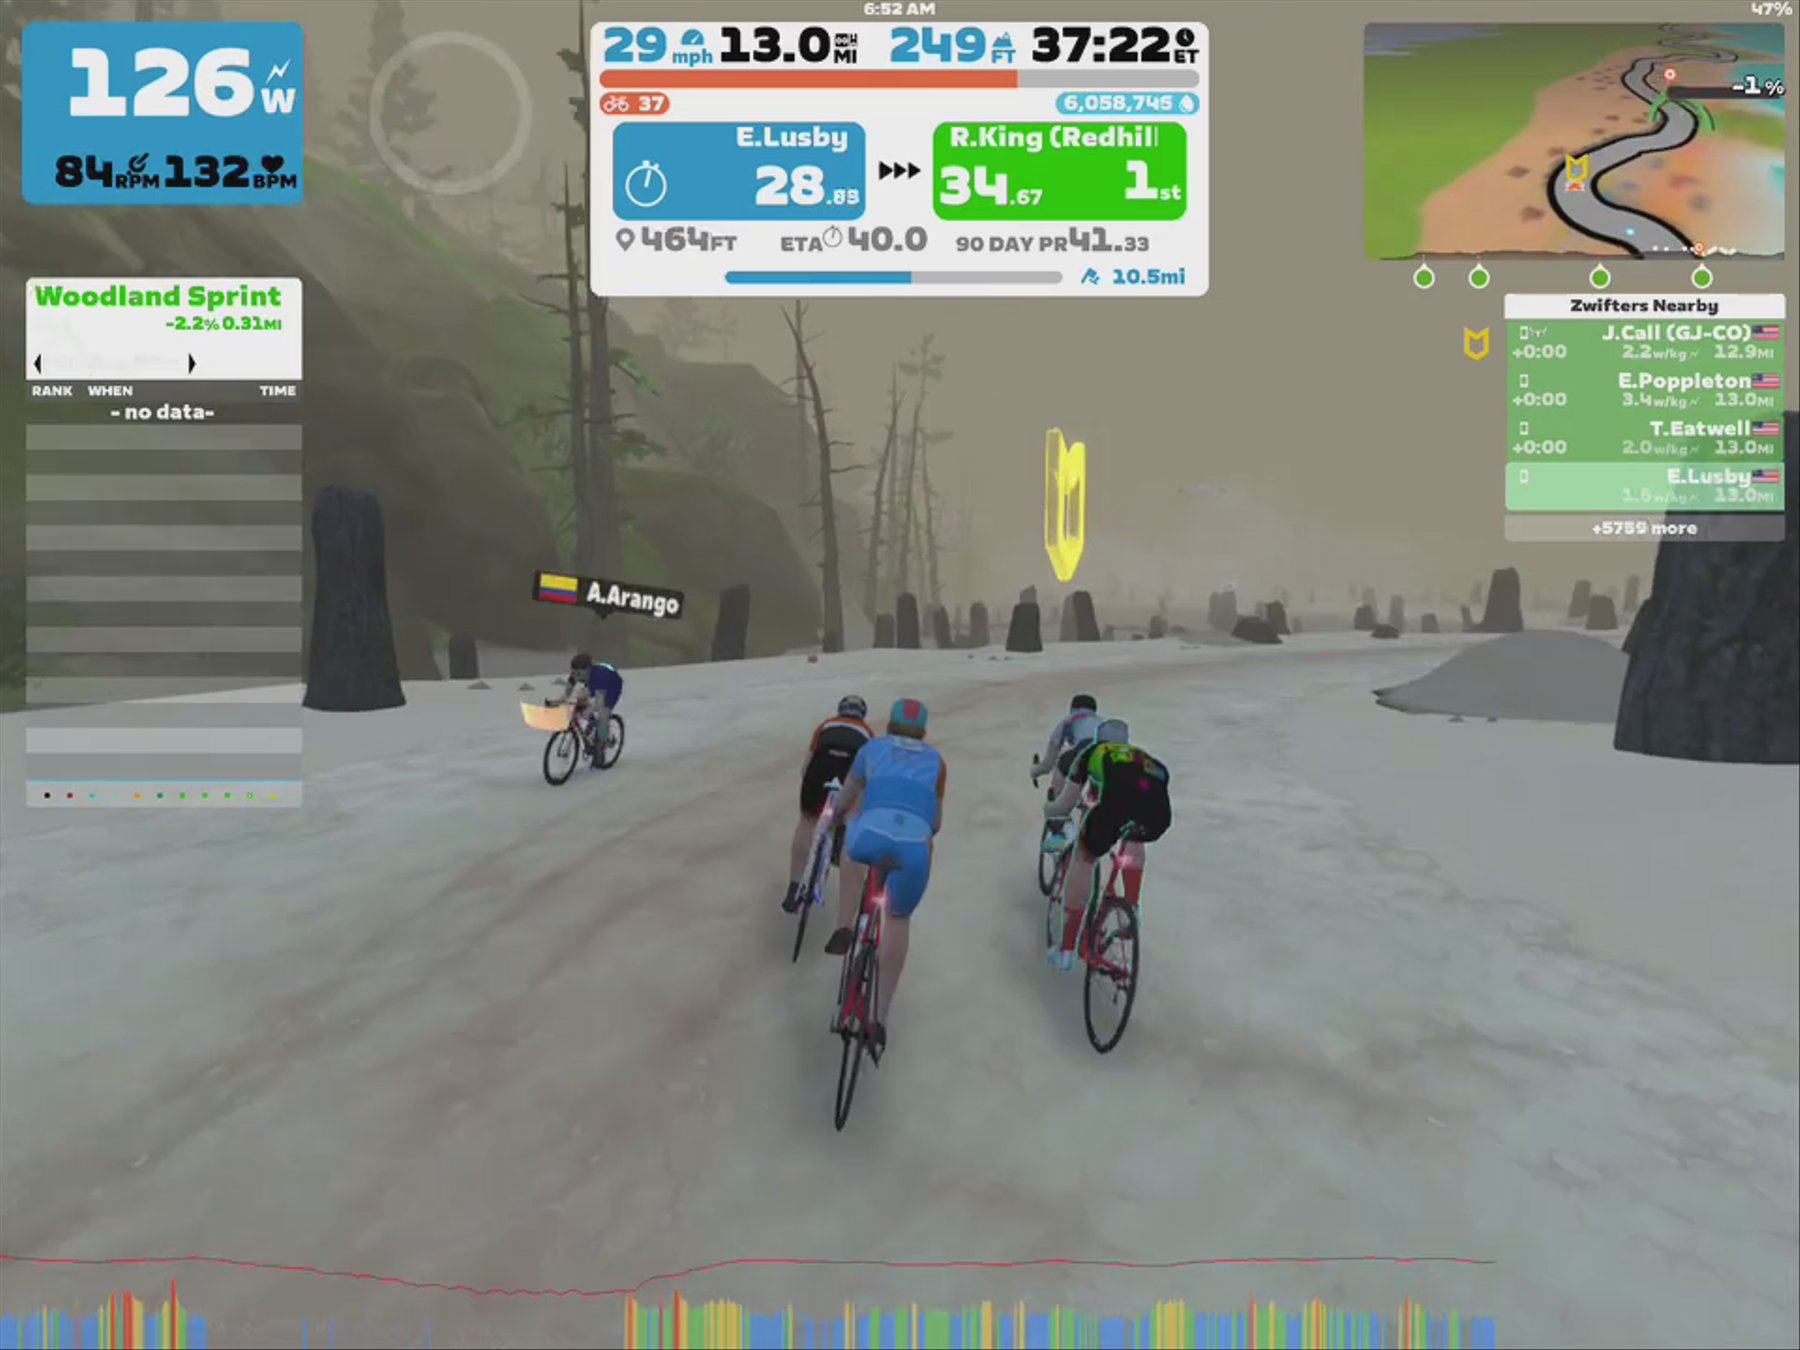 Zwift - James Call (GJ-CO)'s Meetup on Sugar Cookie in Watopia